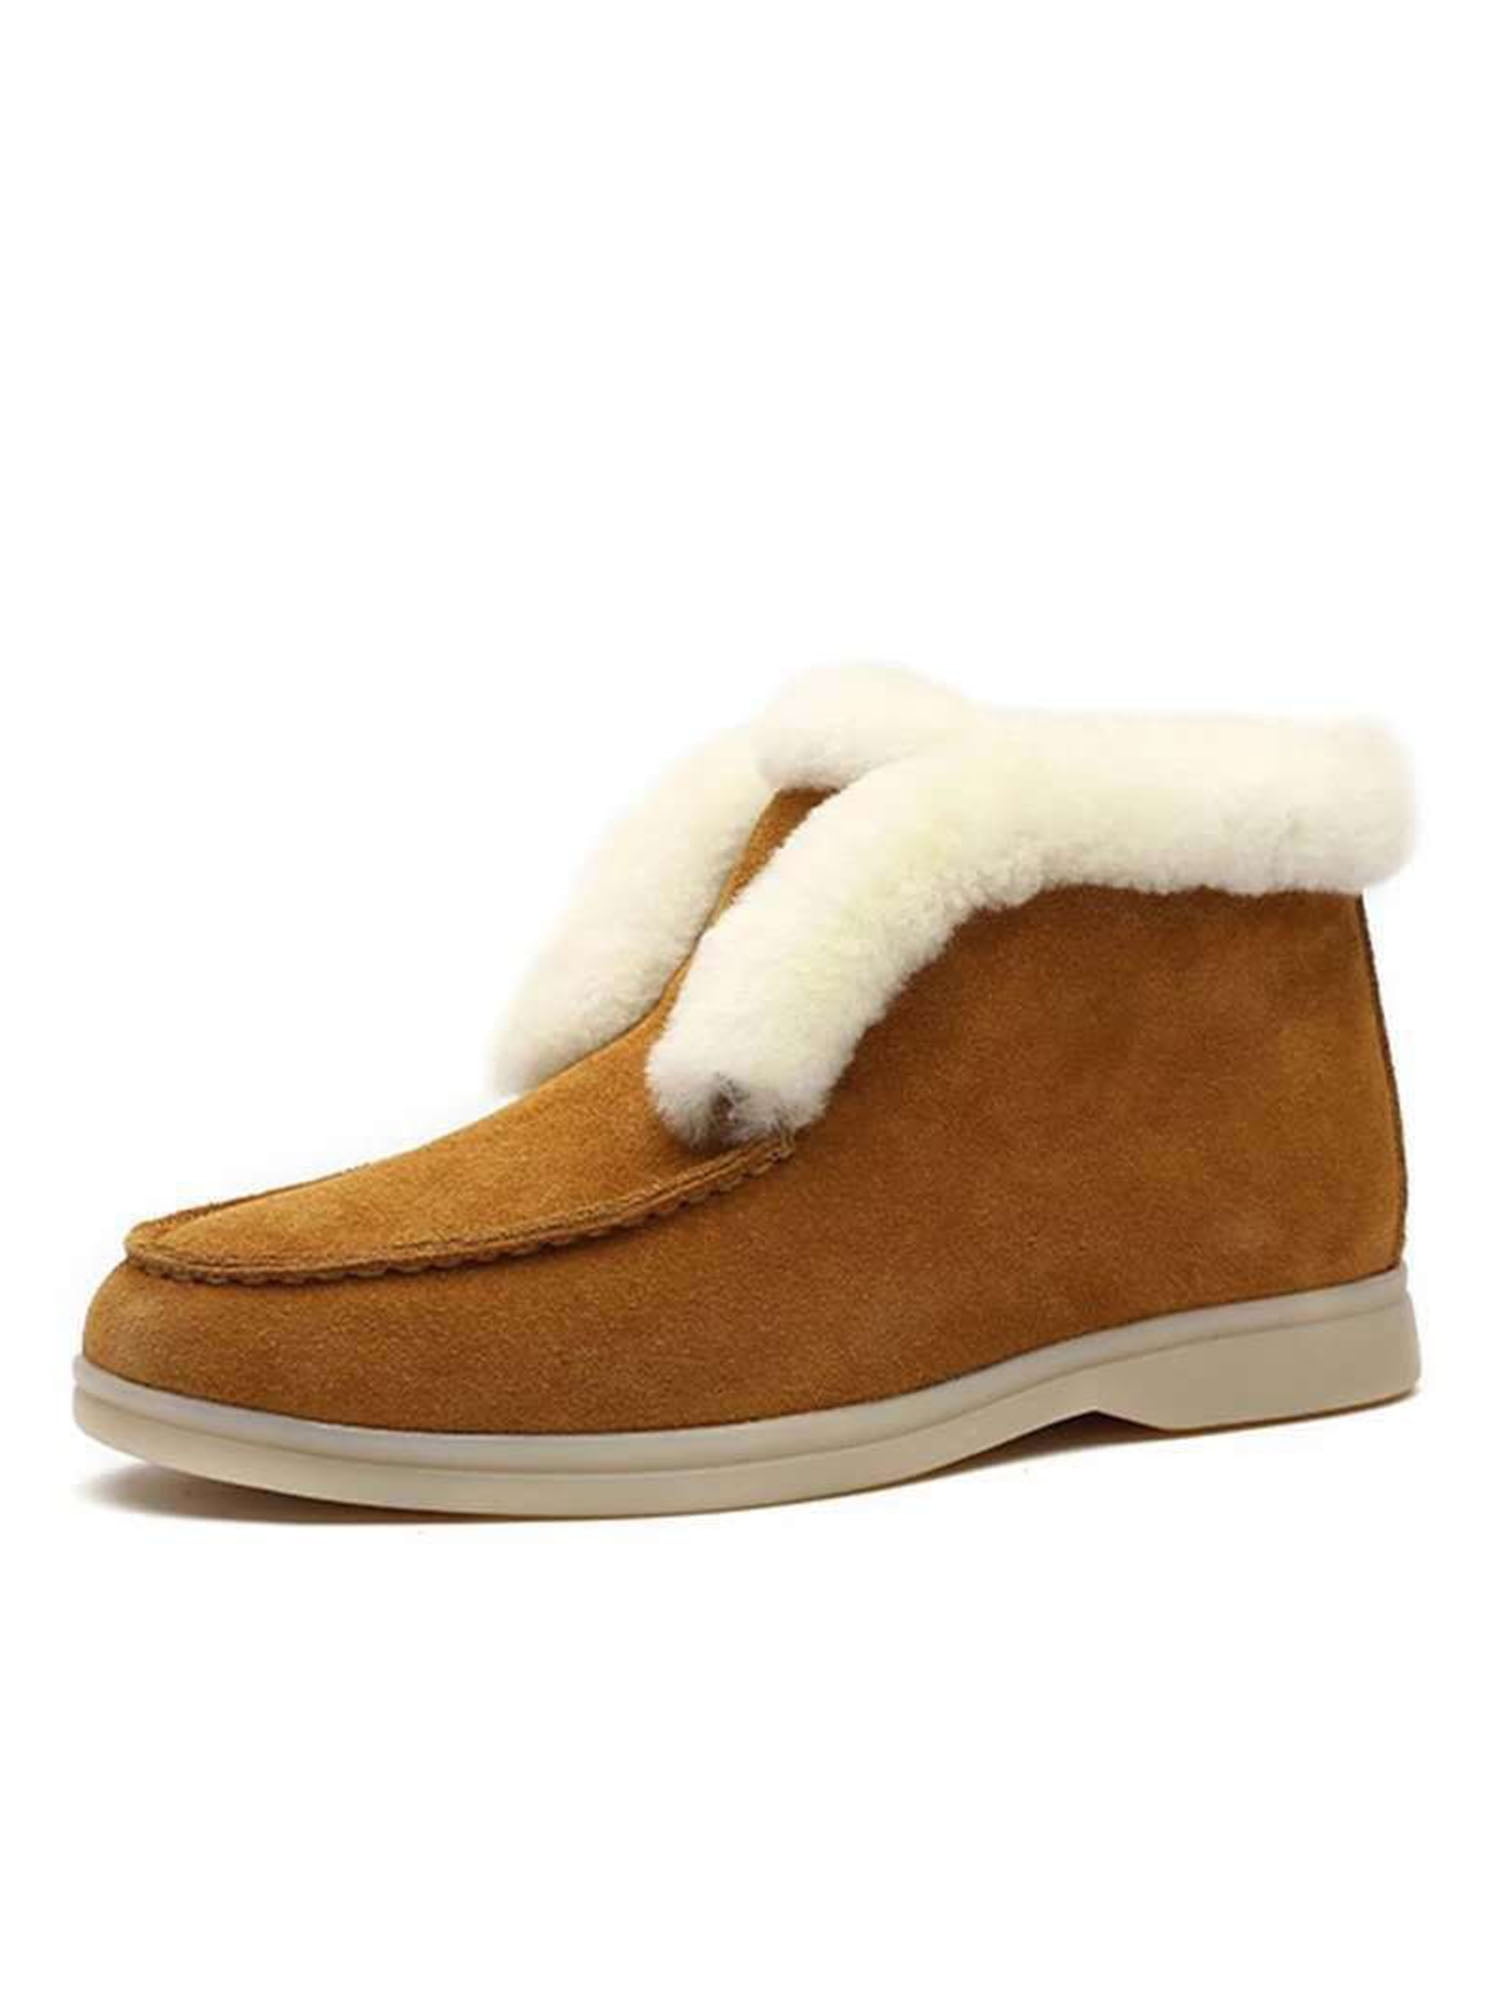 Womens Fur Boots Button Hook and Loop Faux Sheepskin Suede Mid Winter Warm 